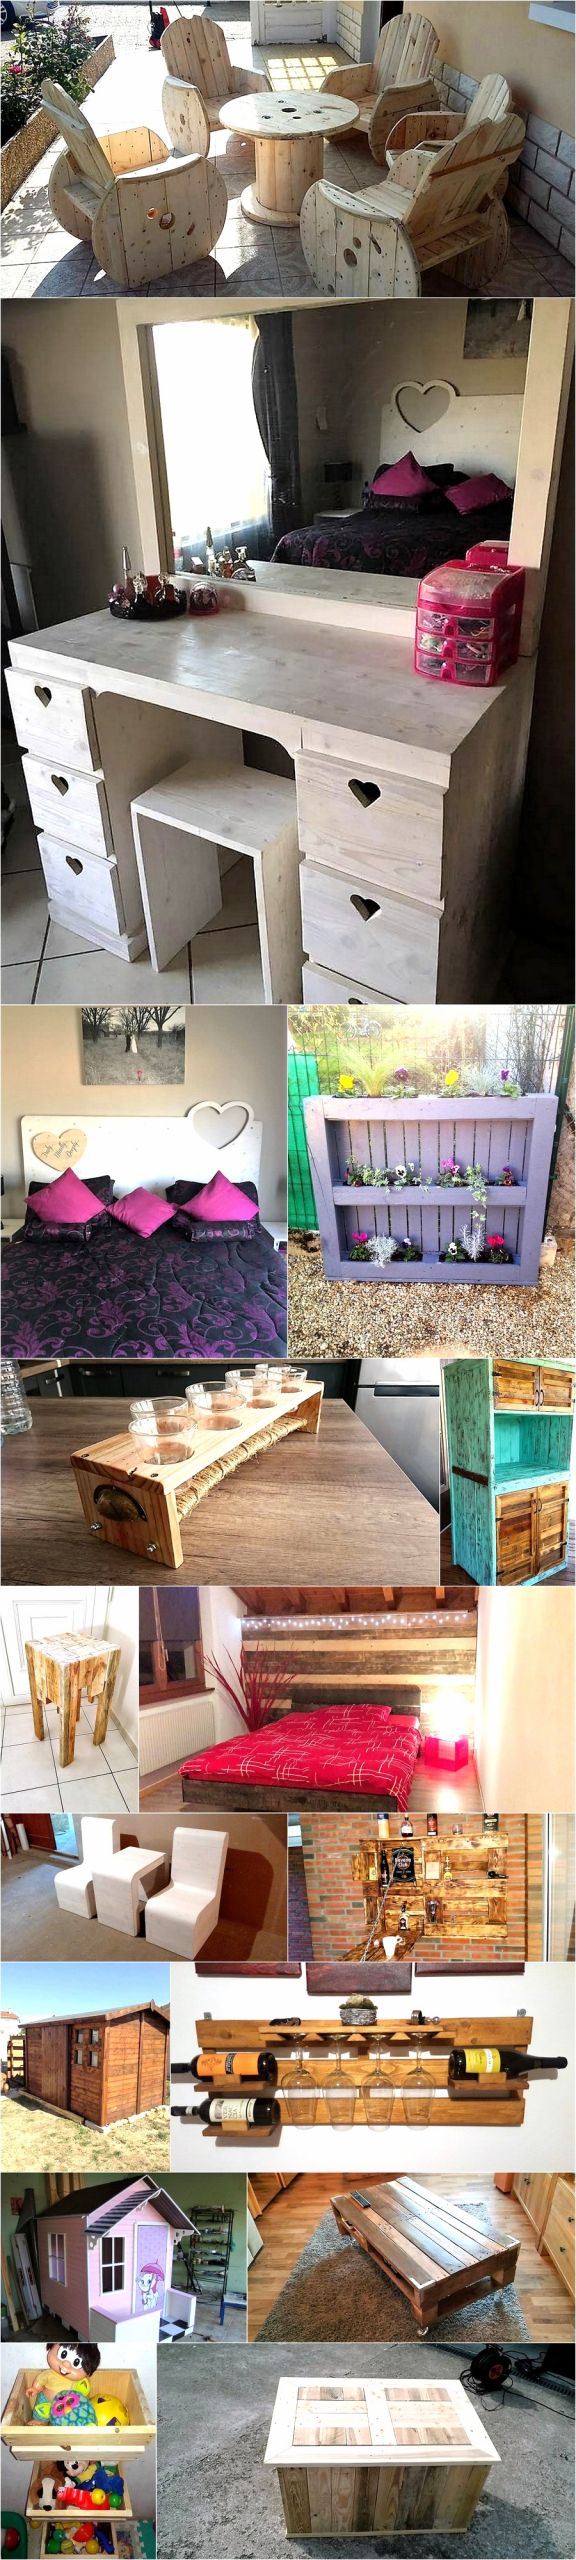 Recycling Ideas for Wooden Pallets